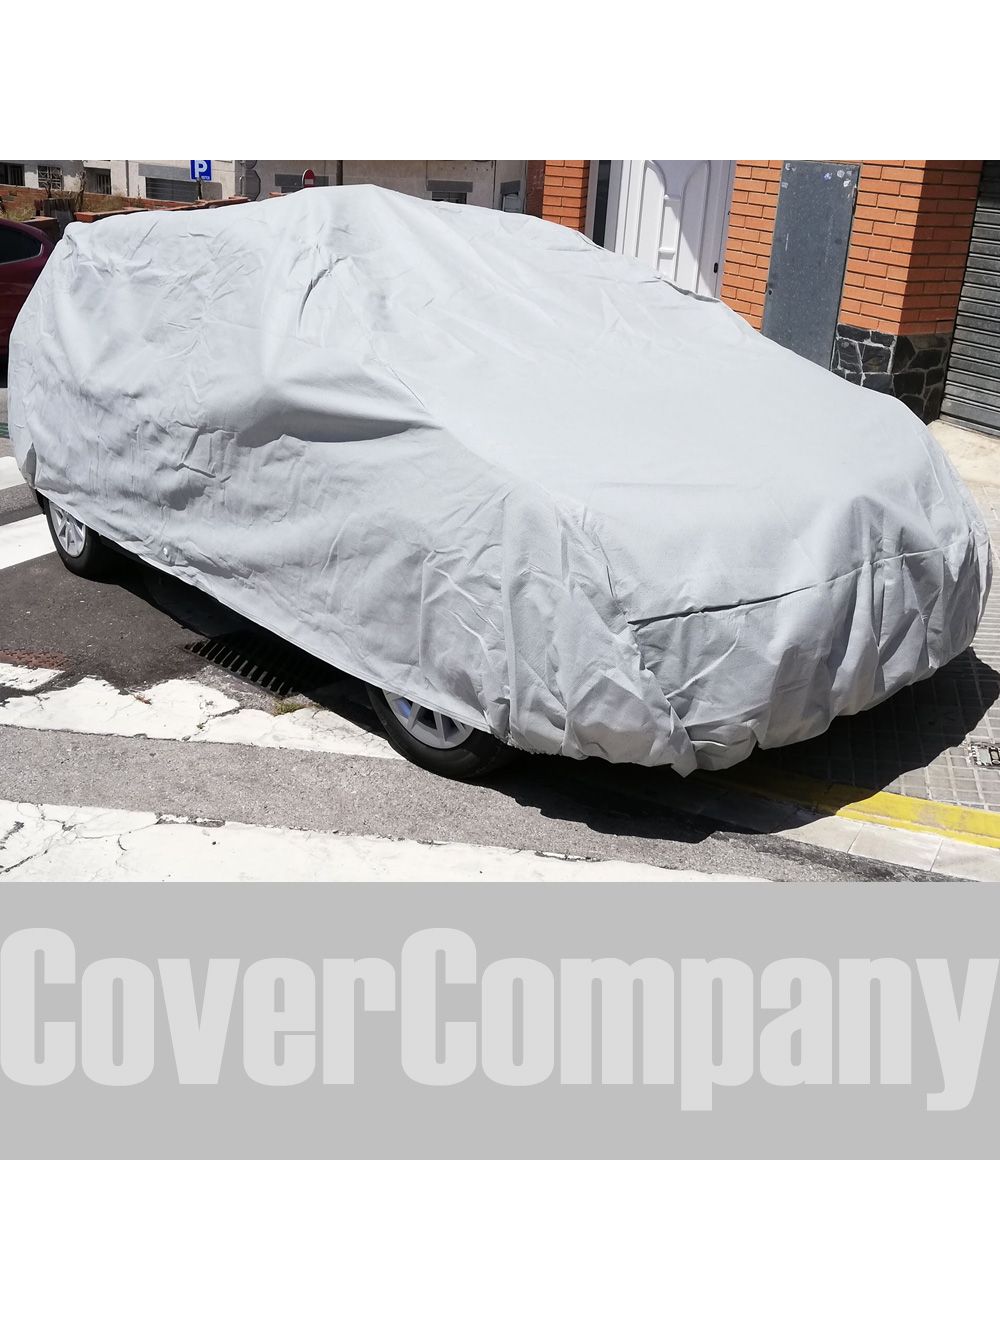 Toyota GT86 Car Cover, Perfect Fit Guarantee